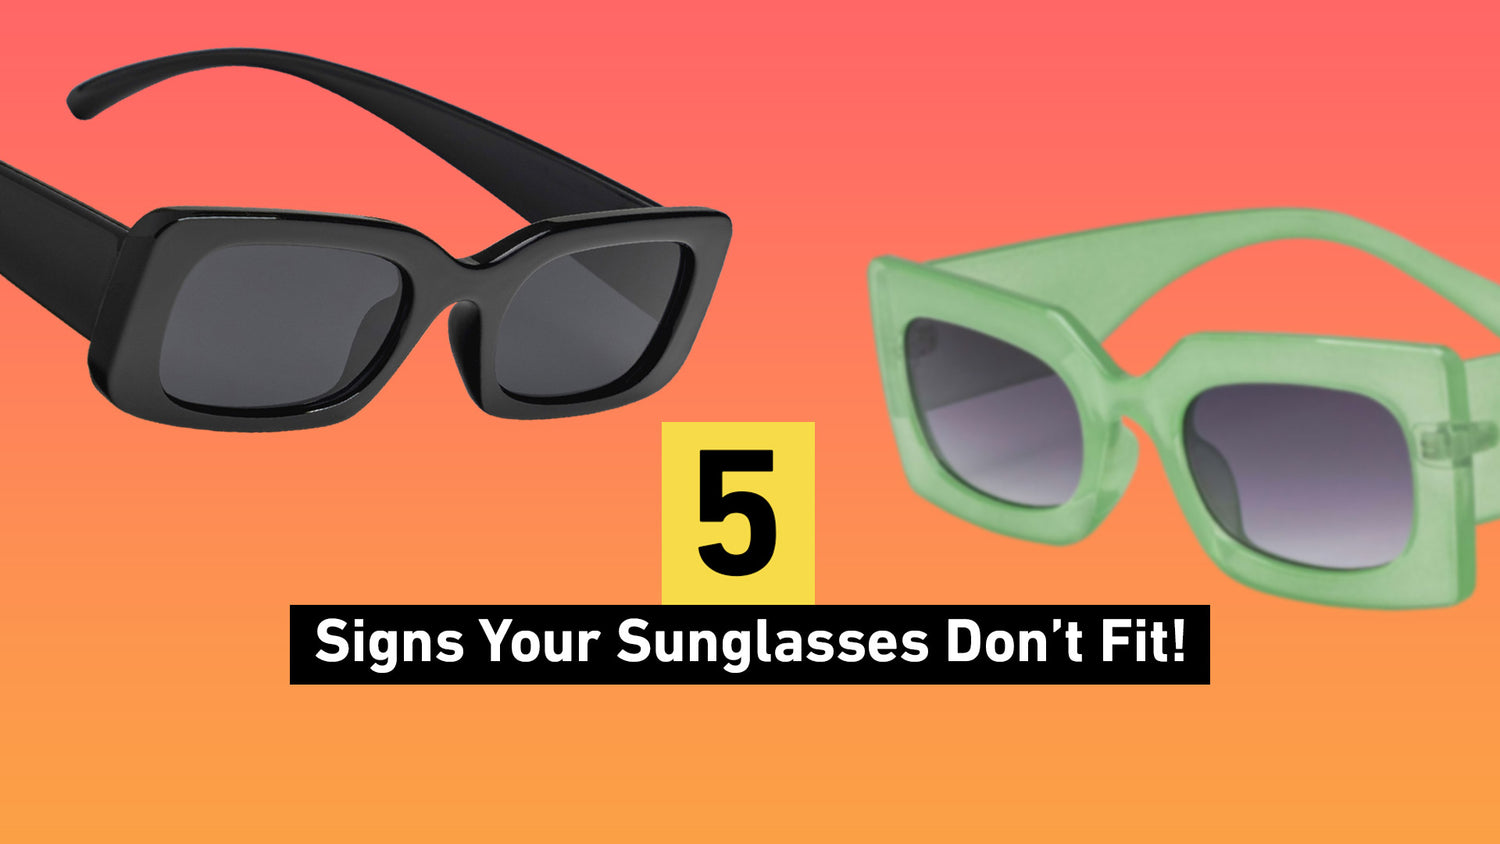 5 Signs Your Sunglasses Don't Fit